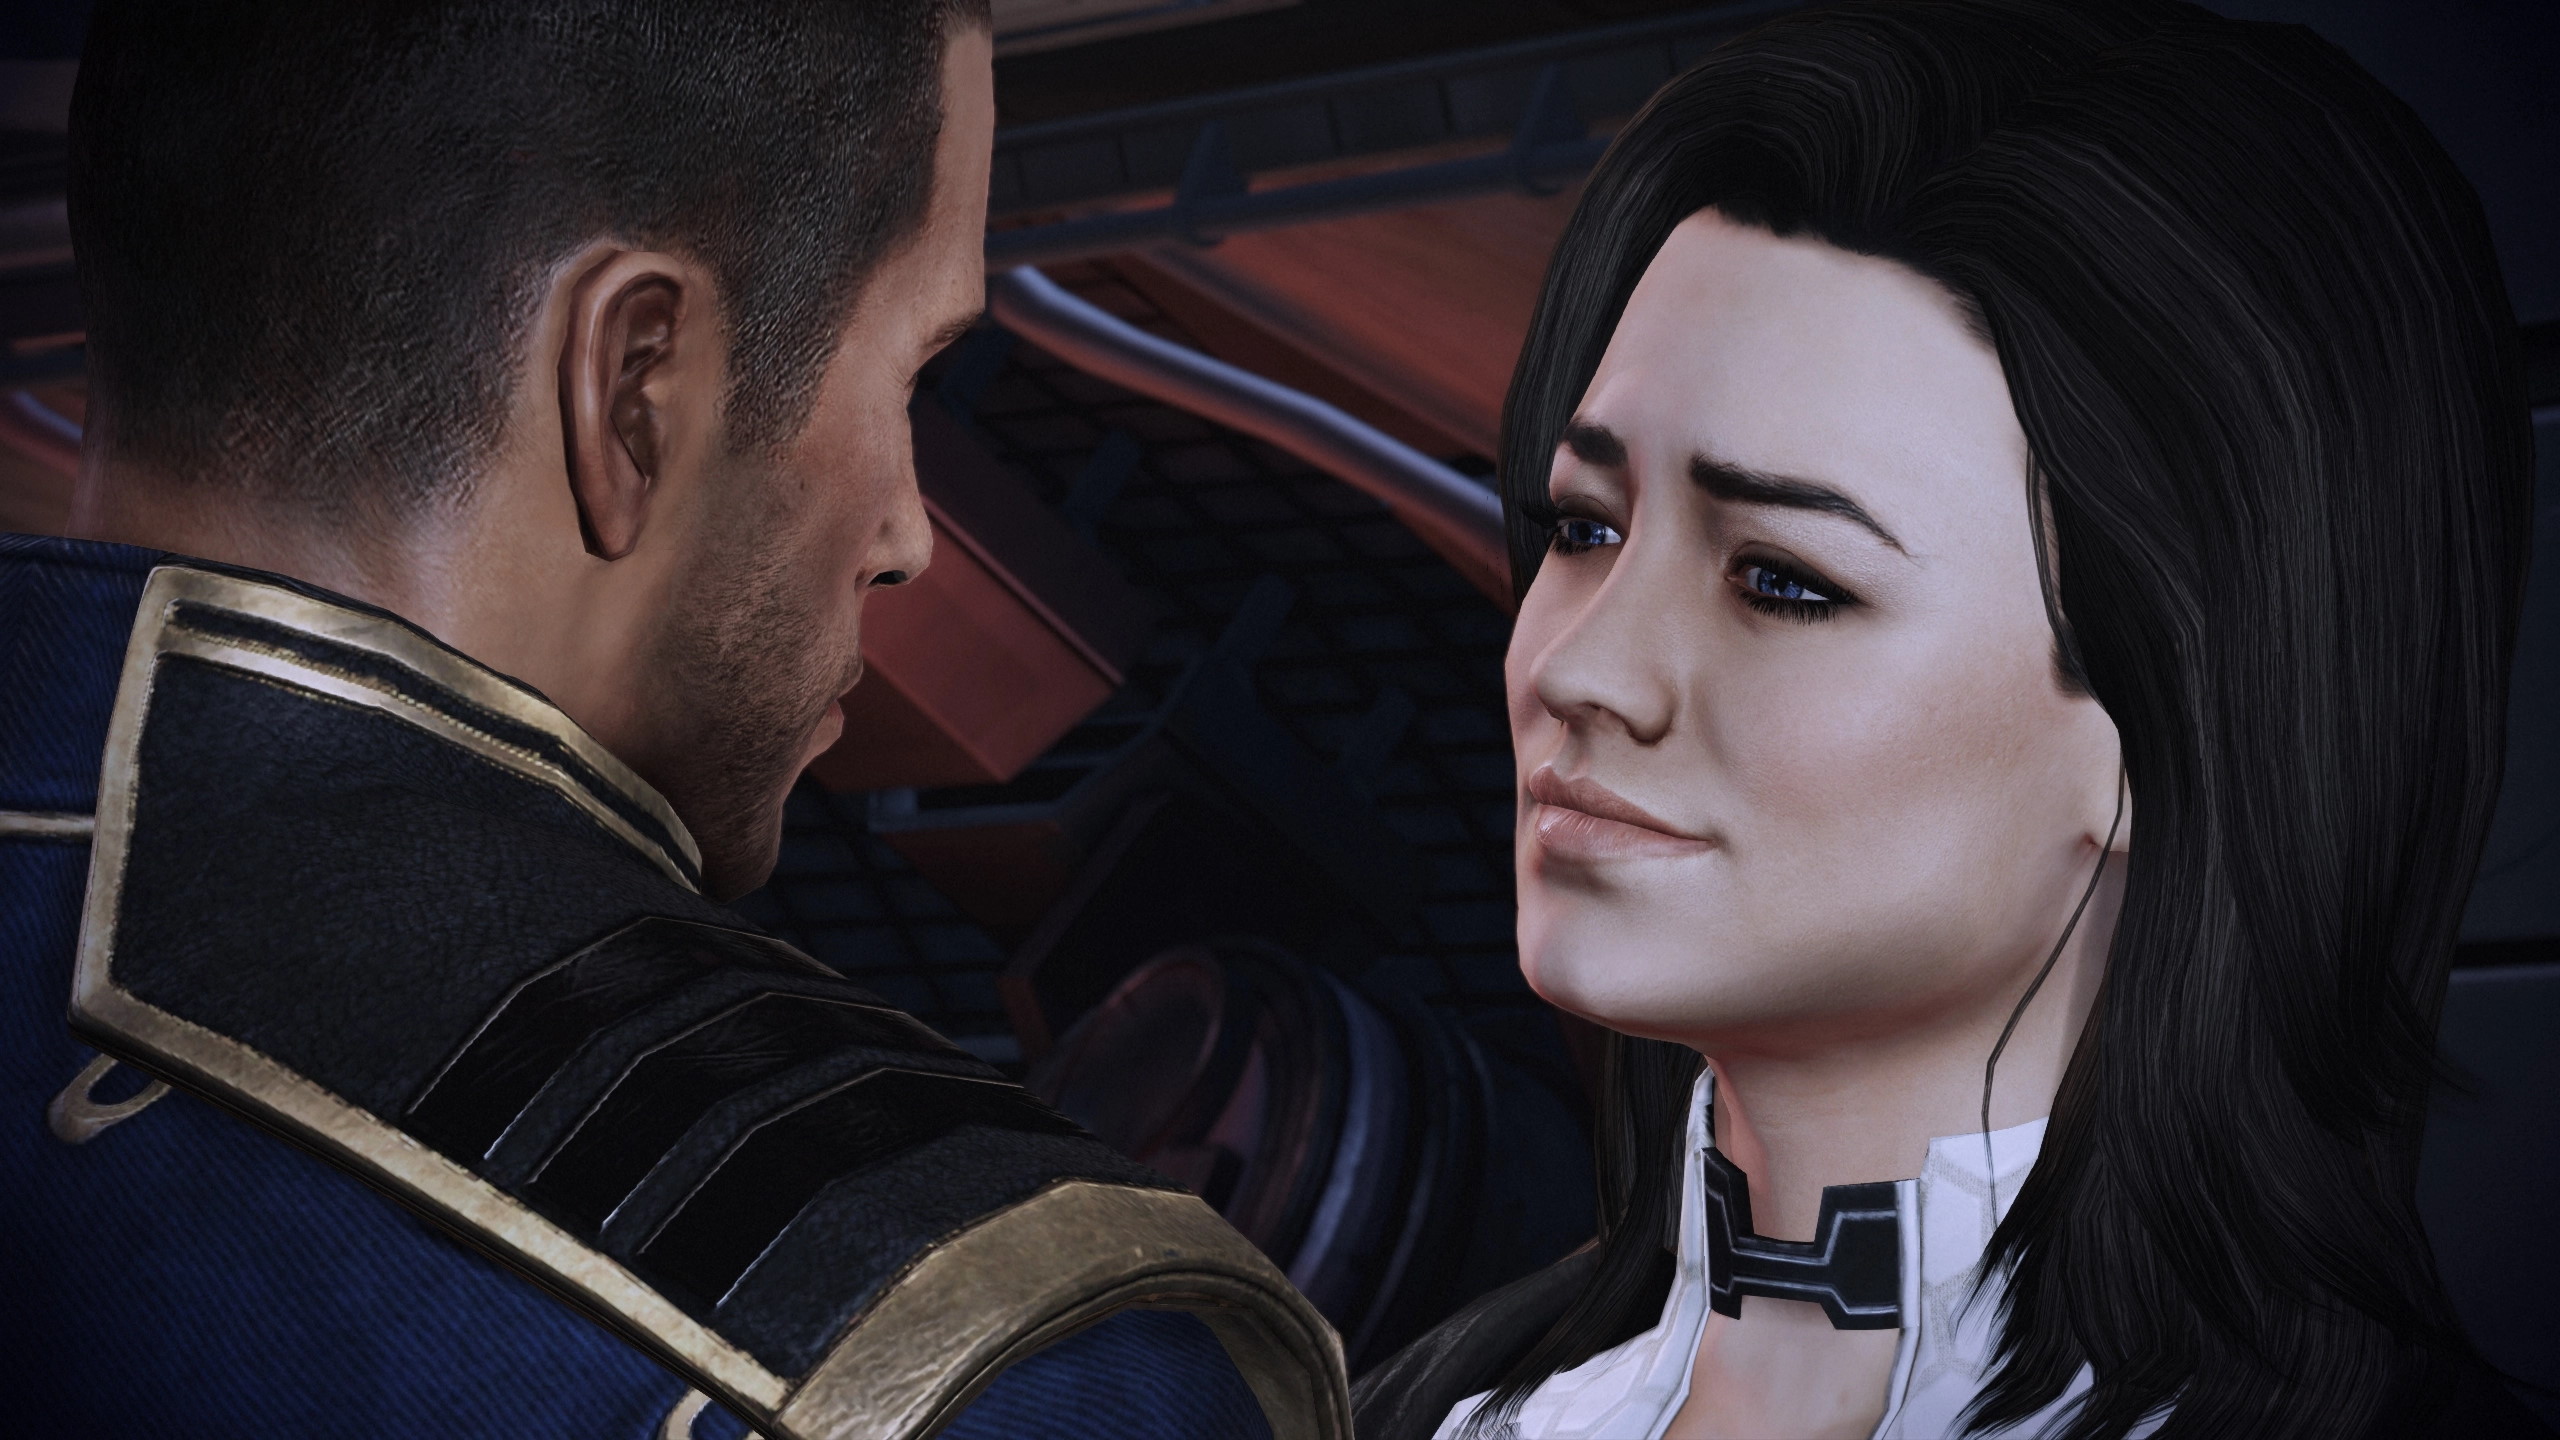  Mass Effect's 'Happy Ending' mod is now available for the Legendary Edition 